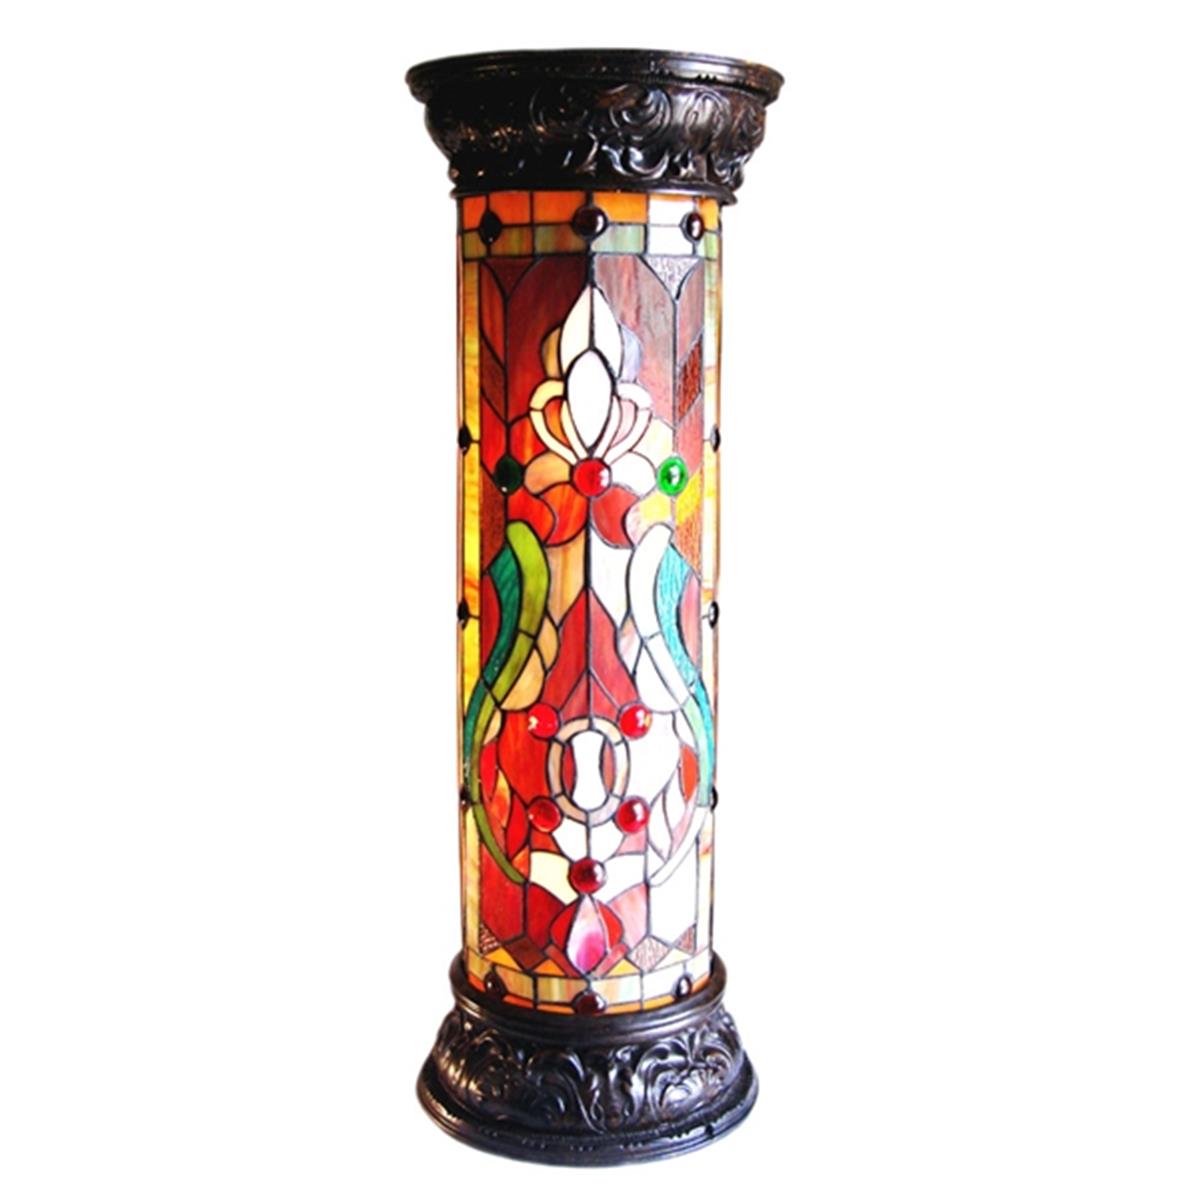 Picture of Chloe CH19405RV30-PL2 30 in. Lighting Ruby Spectacle Tiffany Glass 2 Light Victorian Pedestal Light Fixture